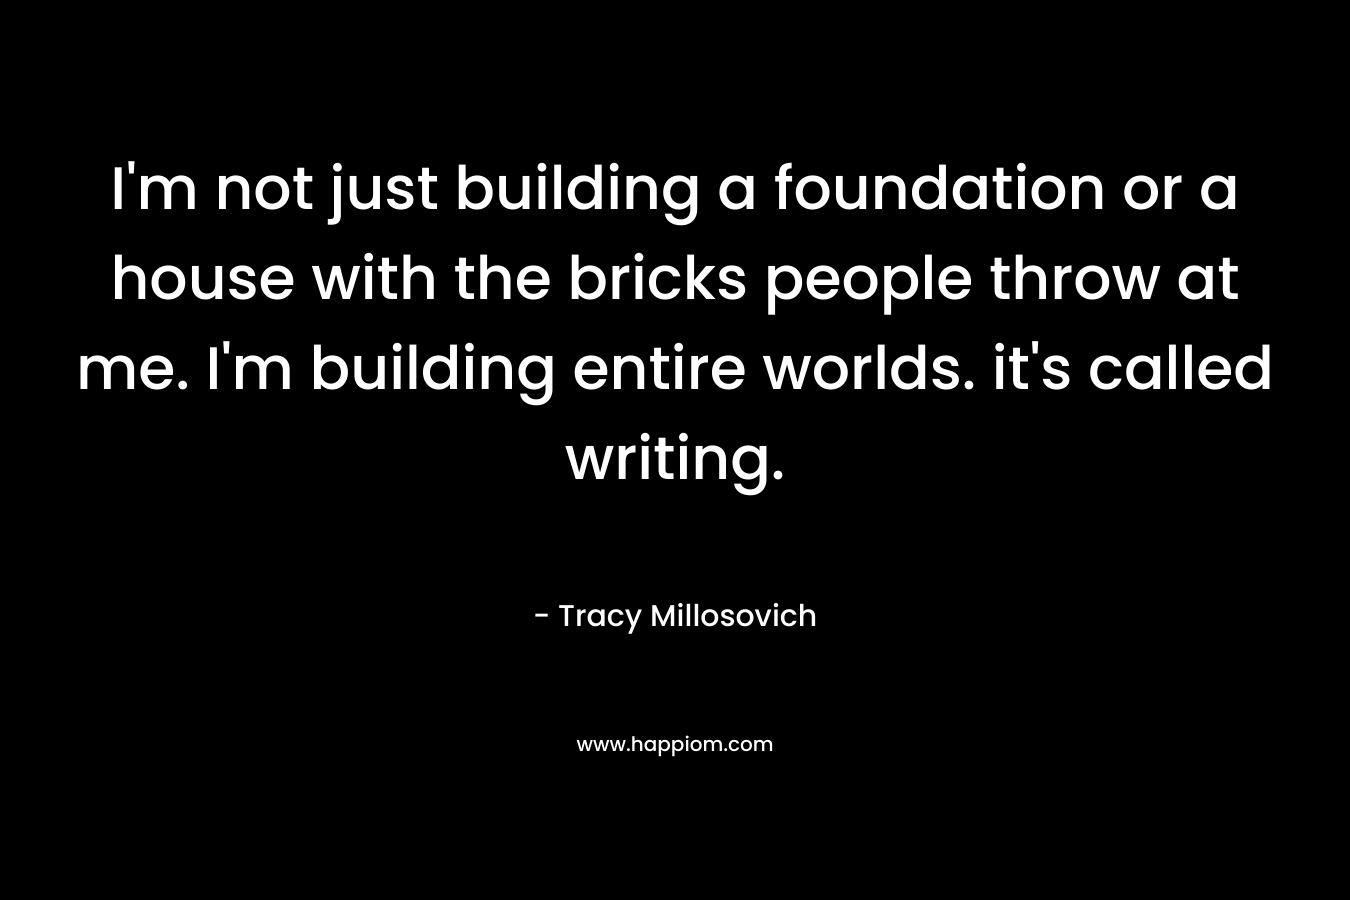 I’m not just building a foundation or a house with the bricks people throw at me. I’m building entire worlds. it’s called writing. – Tracy Millosovich